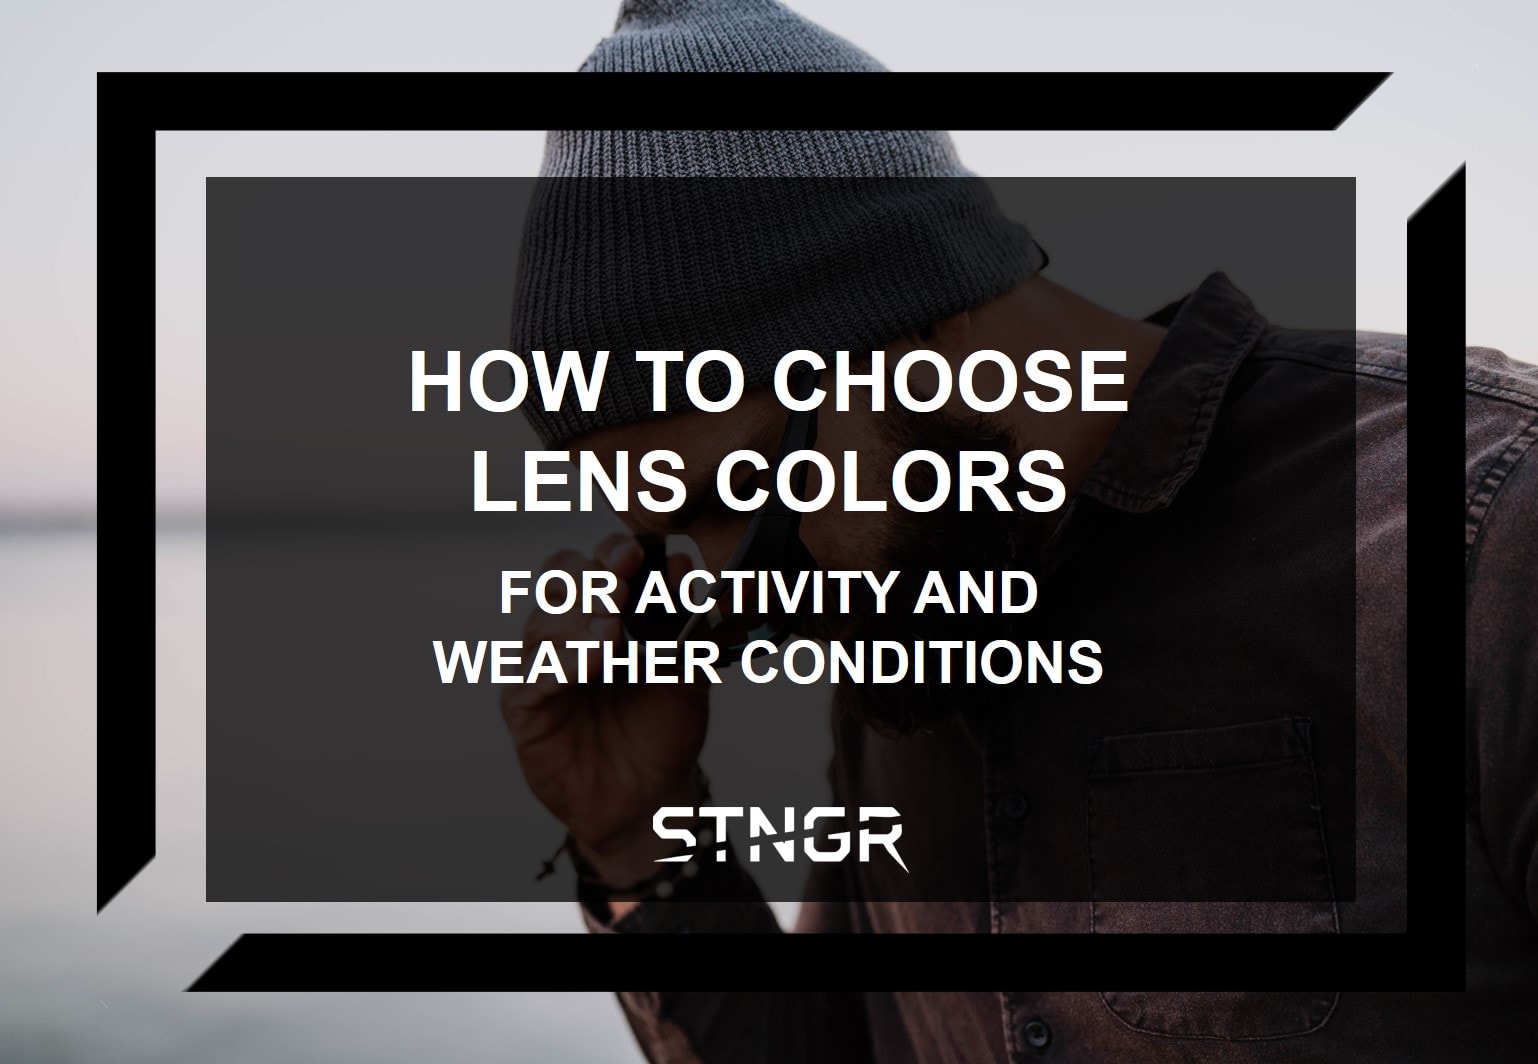 Fly Fishing Sunglasses: How To Choose a Lens Color - blog